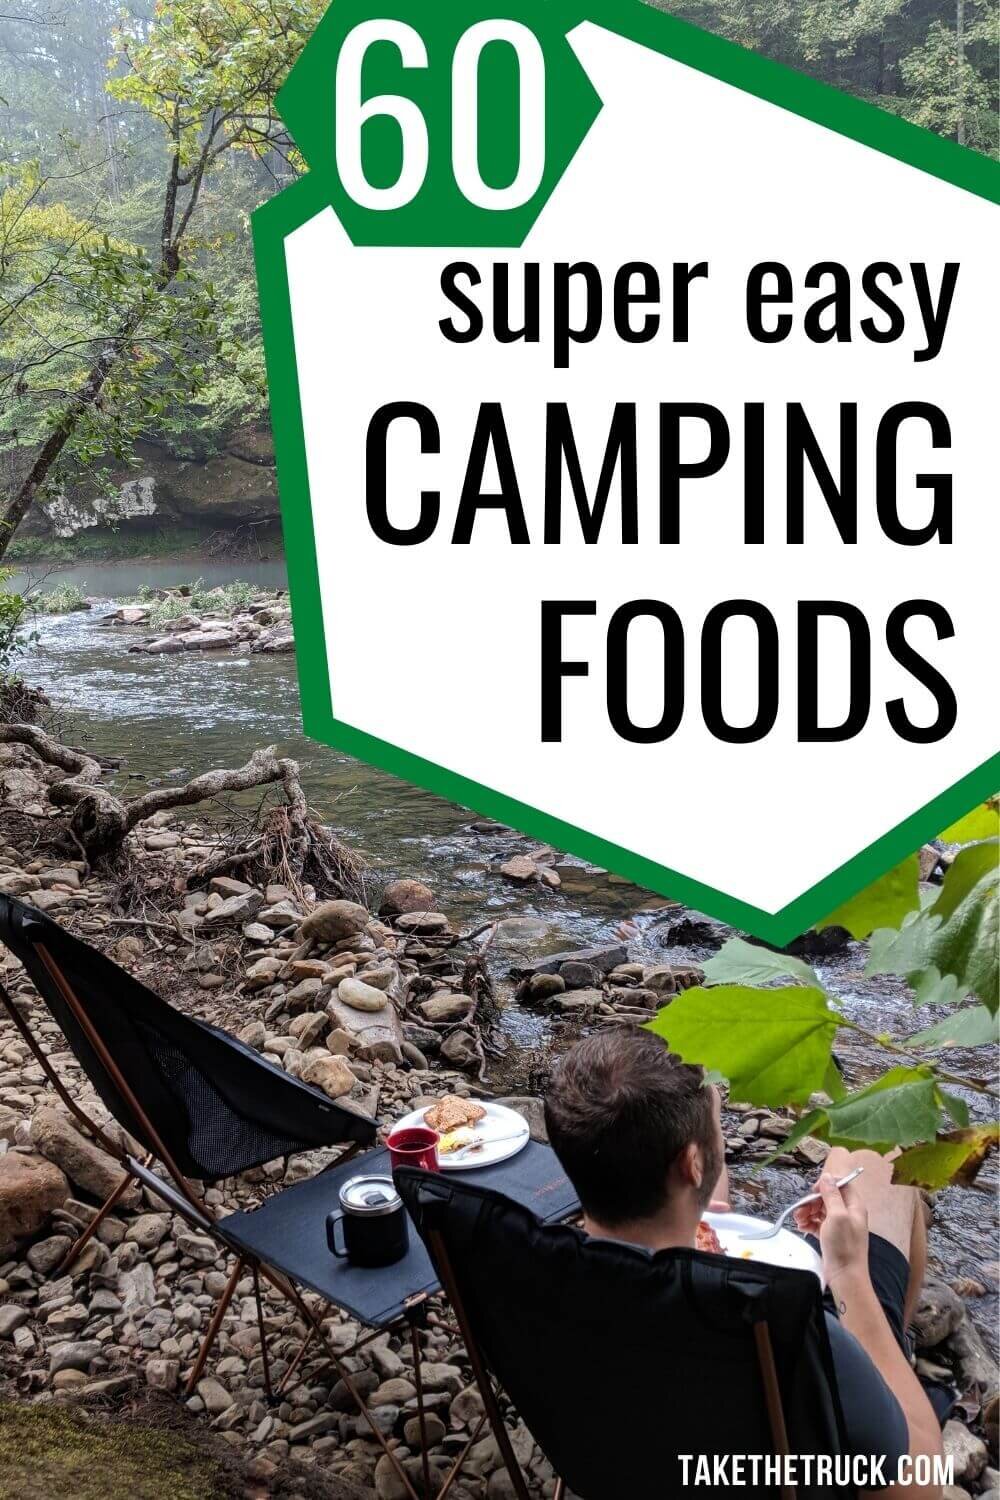 60 different easy camping meal and food ideas! Easy camping breakfasts, lunches, easy camping dinners, plus sides, camping snacks, and desserts - all either no cook or make ahead.